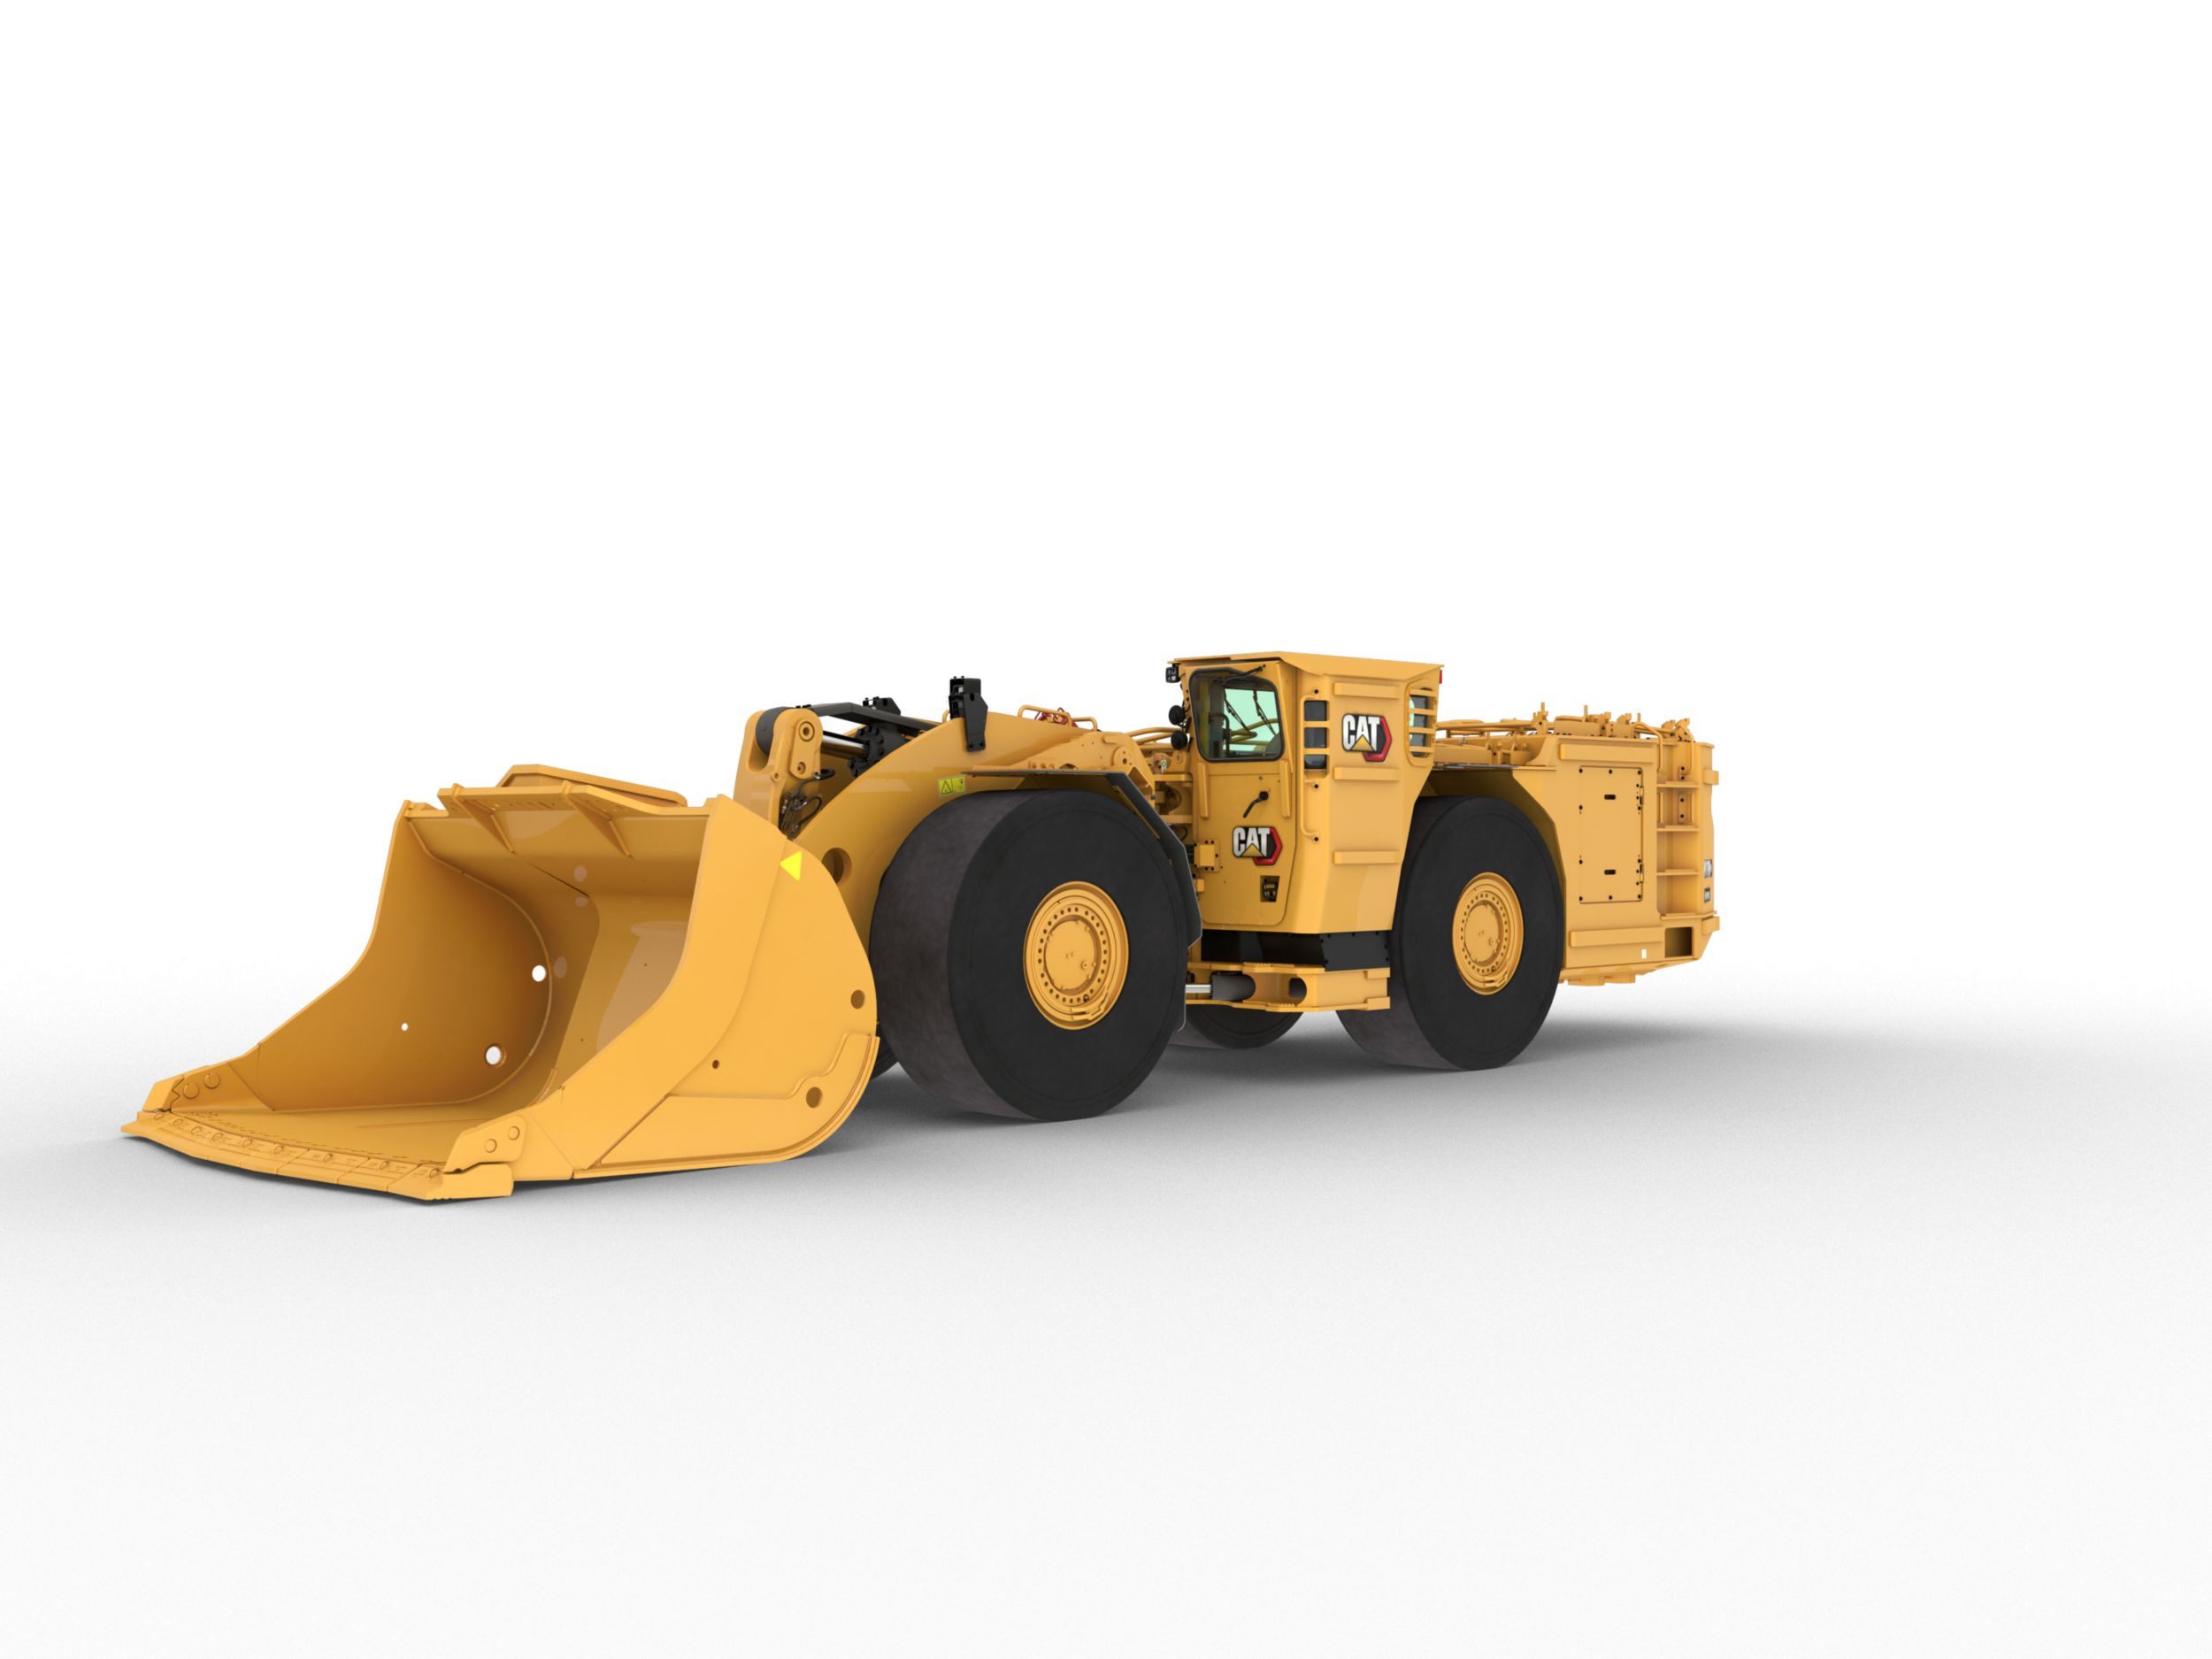 R1700 XE Underground Battery-Electric LHD Loader